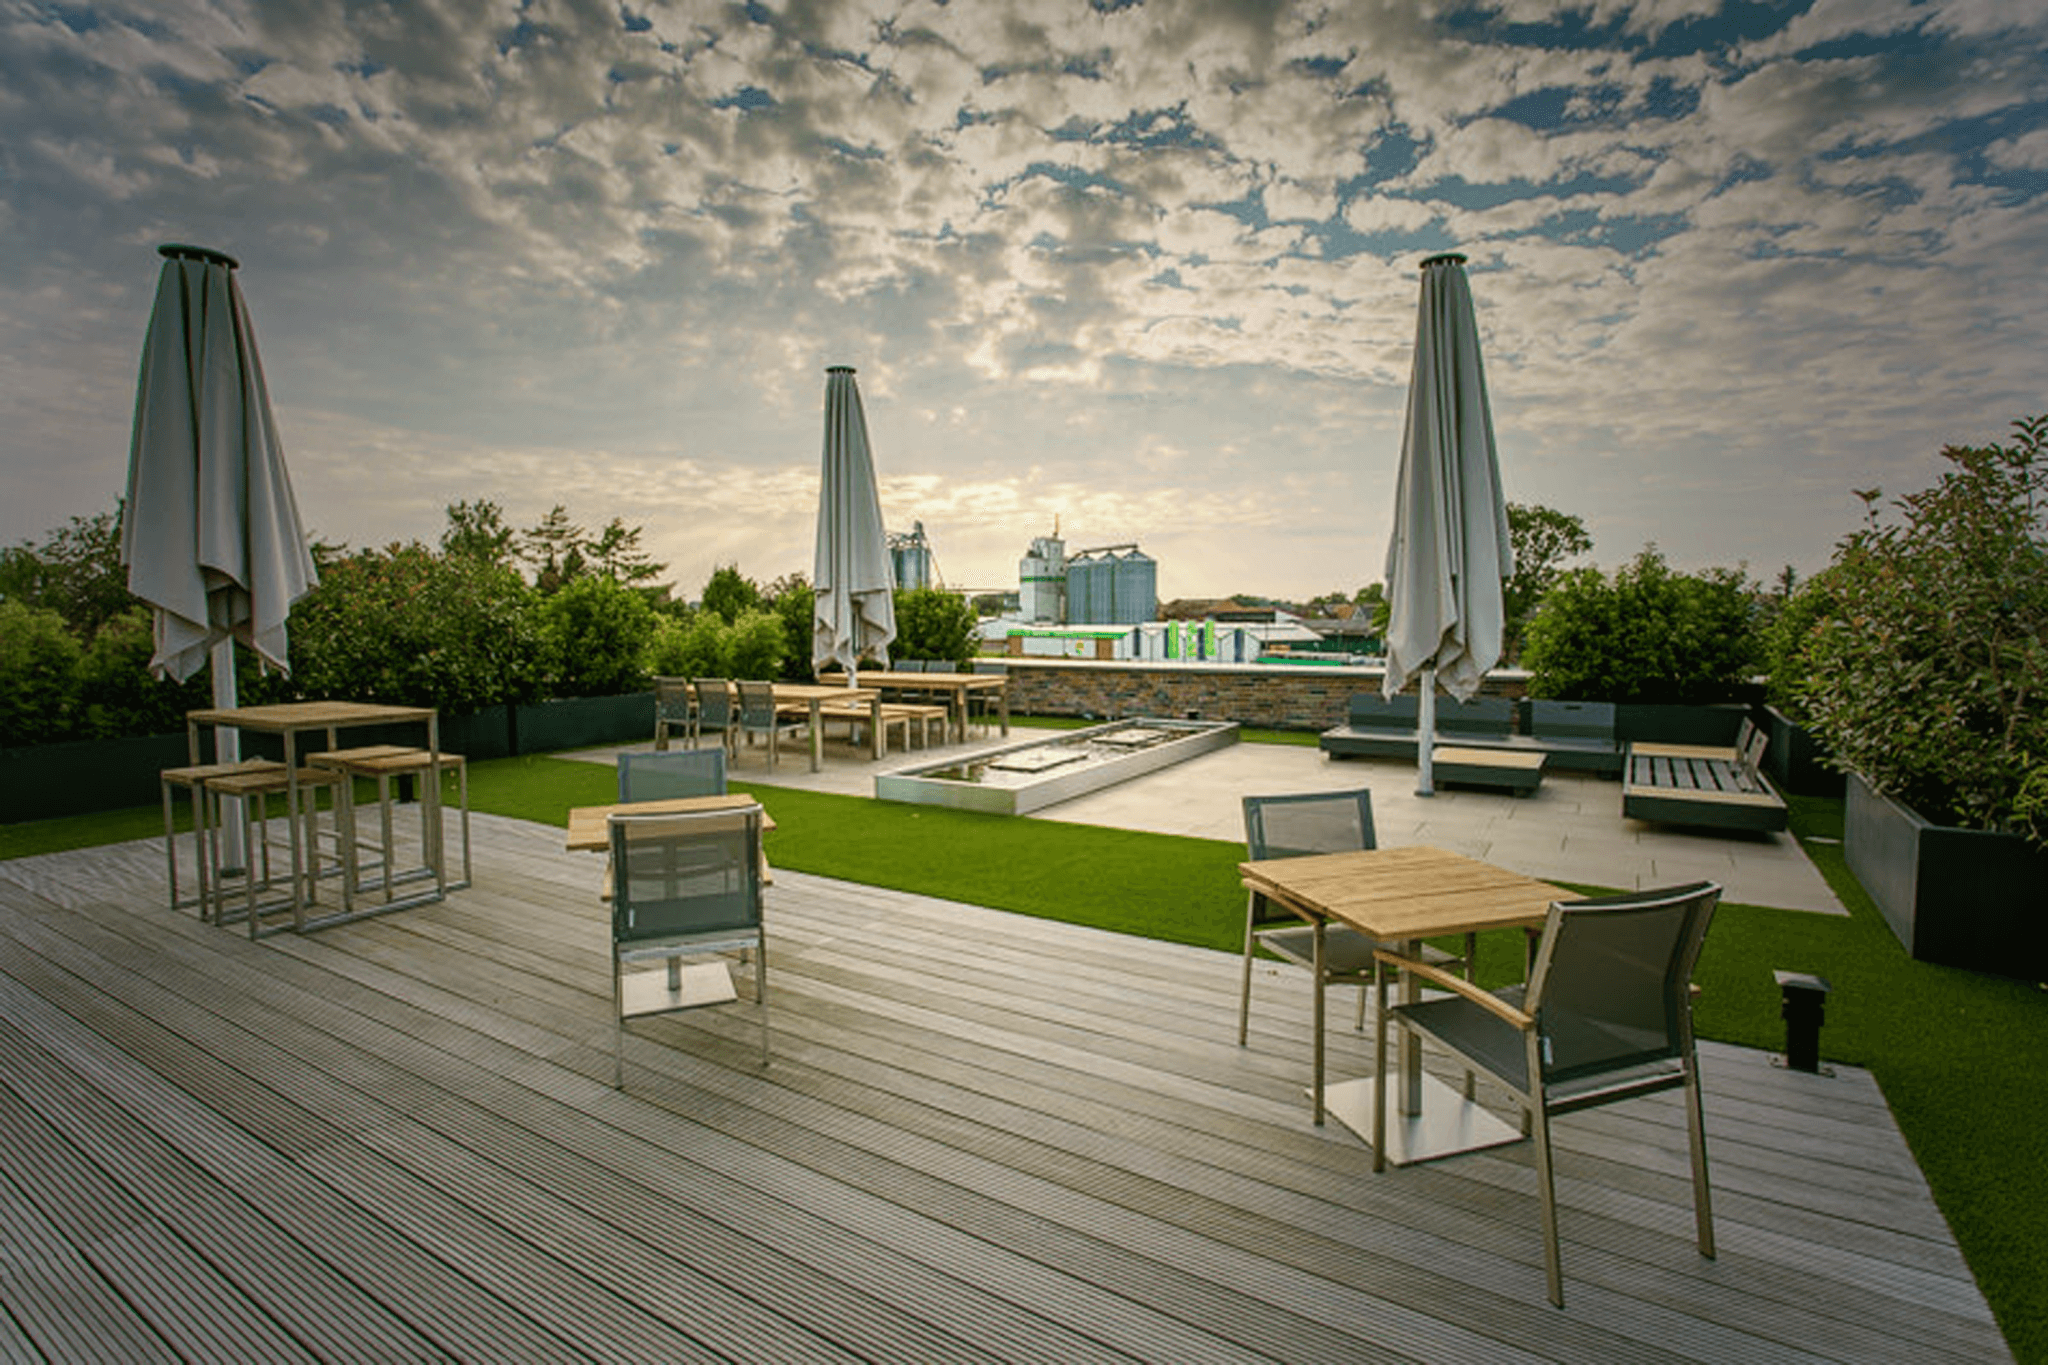 Photo of the roof terrace on the company building of d.velop Life Sciences